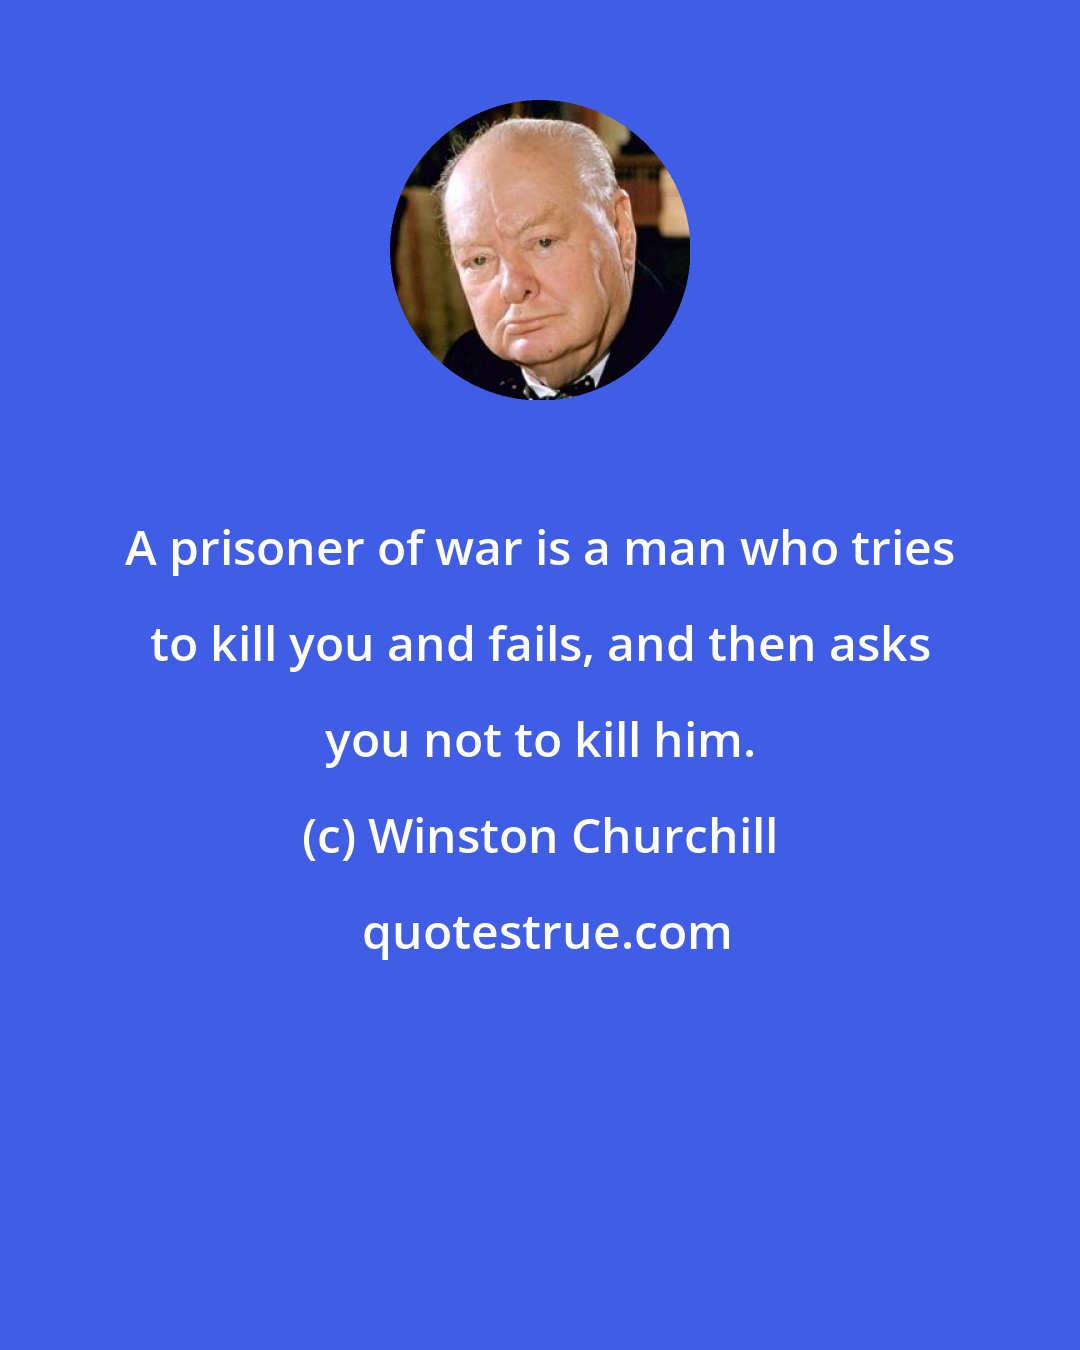 Winston Churchill: A prisoner of war is a man who tries to kill you and fails, and then asks you not to kill him.